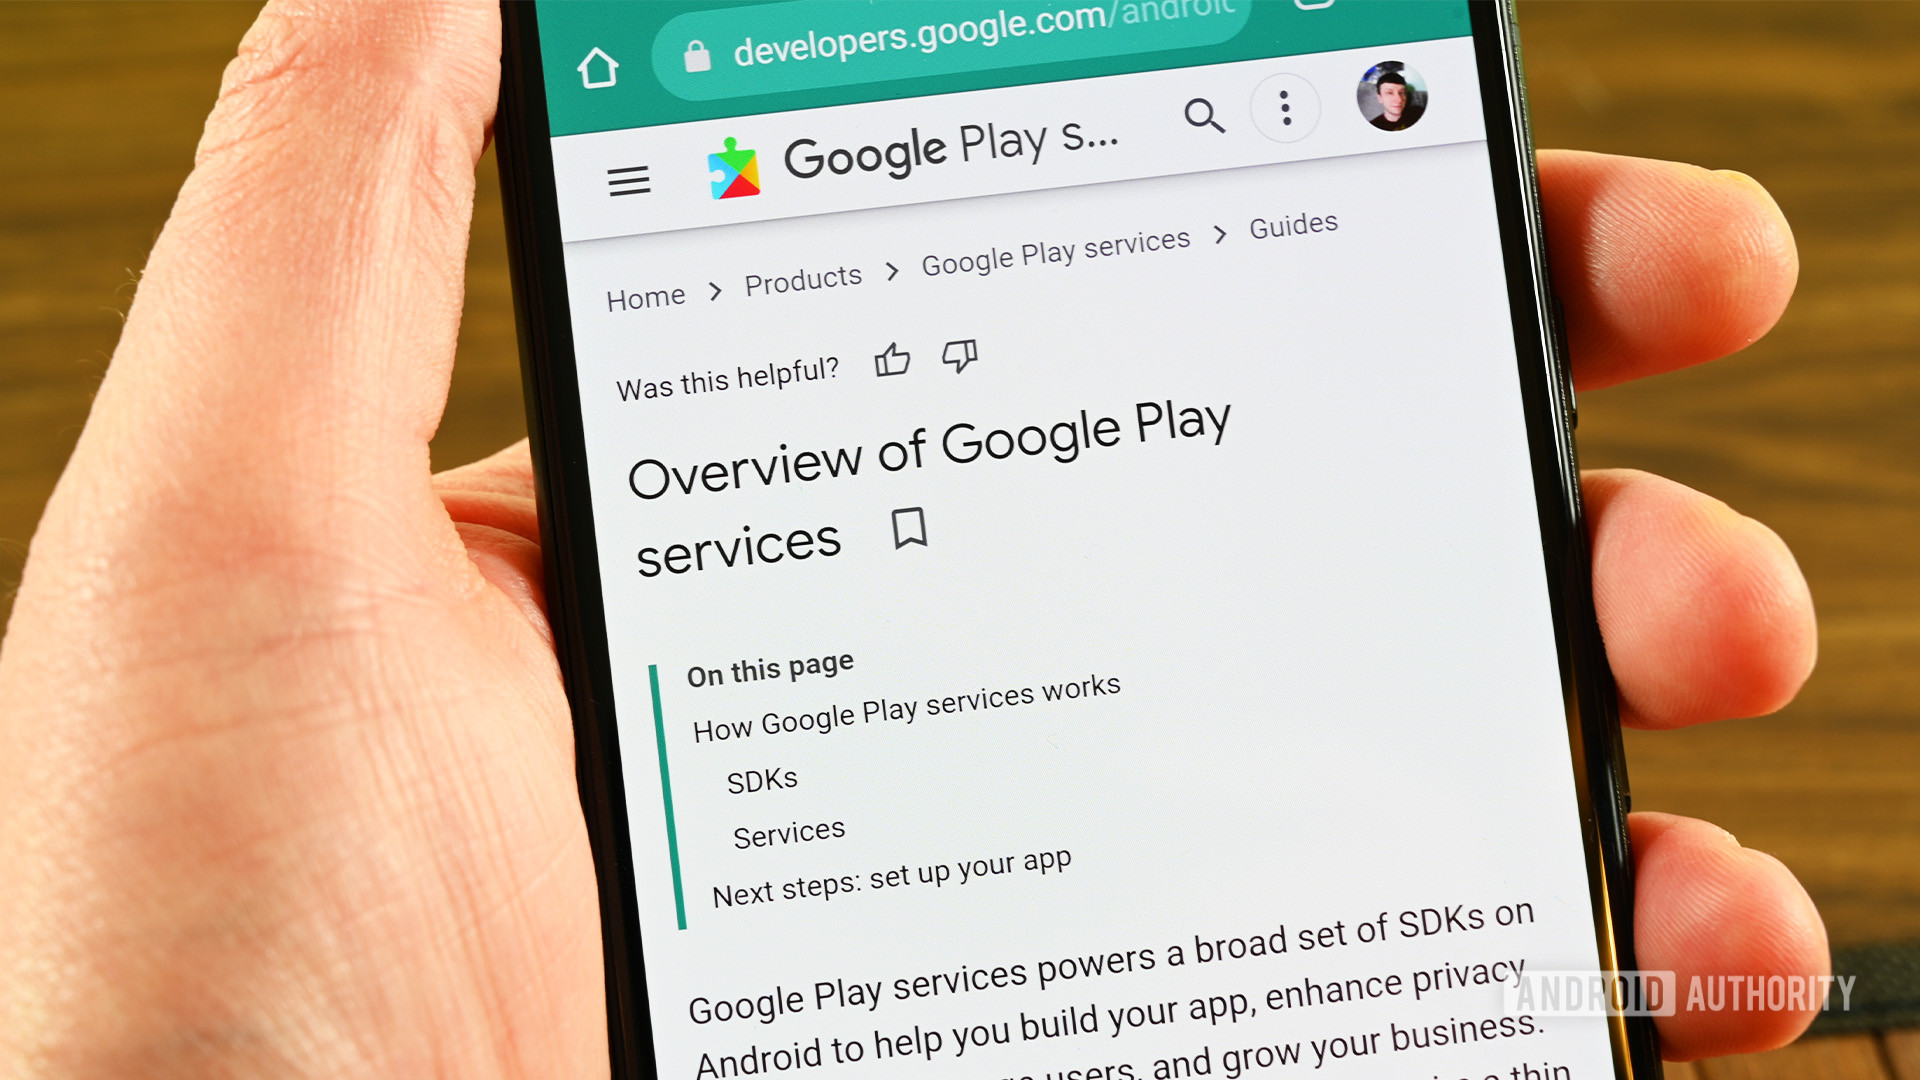 Overview of Google Play Services